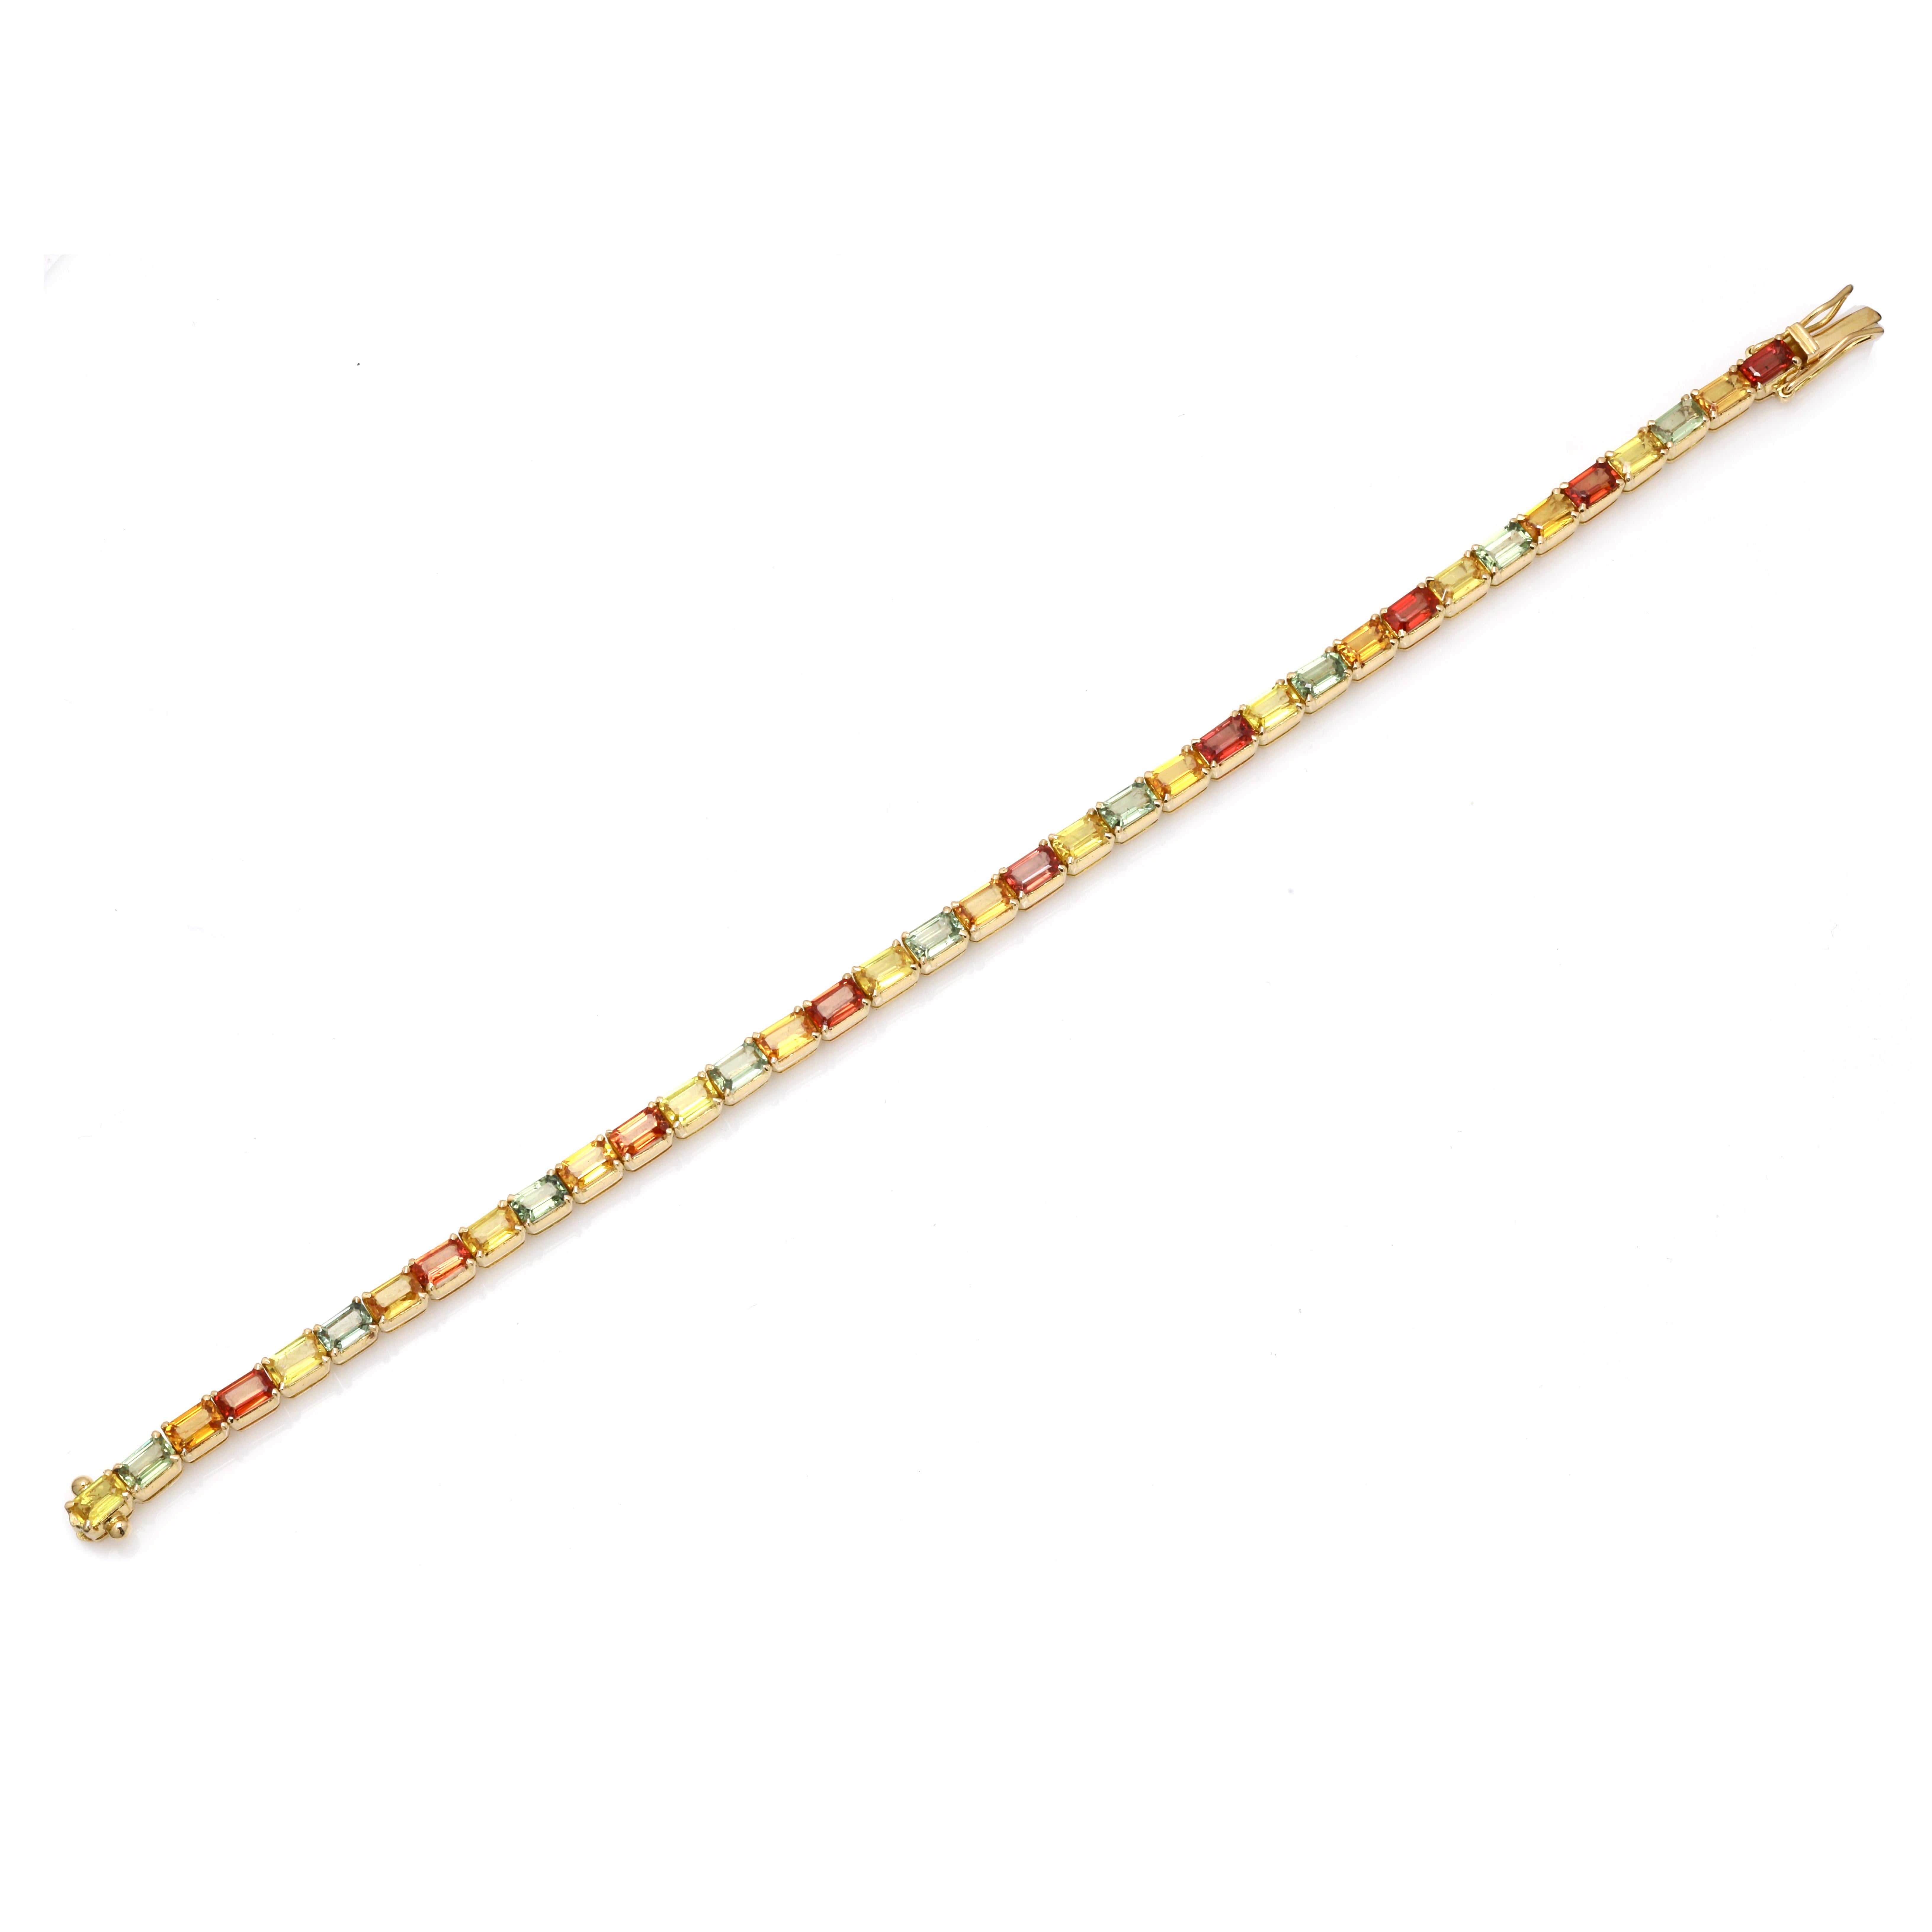 This Handcrafted Multi Colored Sapphire Tennis Bracelet in 18K gold showcases 36 endlessly sparkling natural sapphires, weighing 12.25 carat. It measures 7.75 inches long in length.
Sapphire stimulates concentration and reduces stress. 
Designed